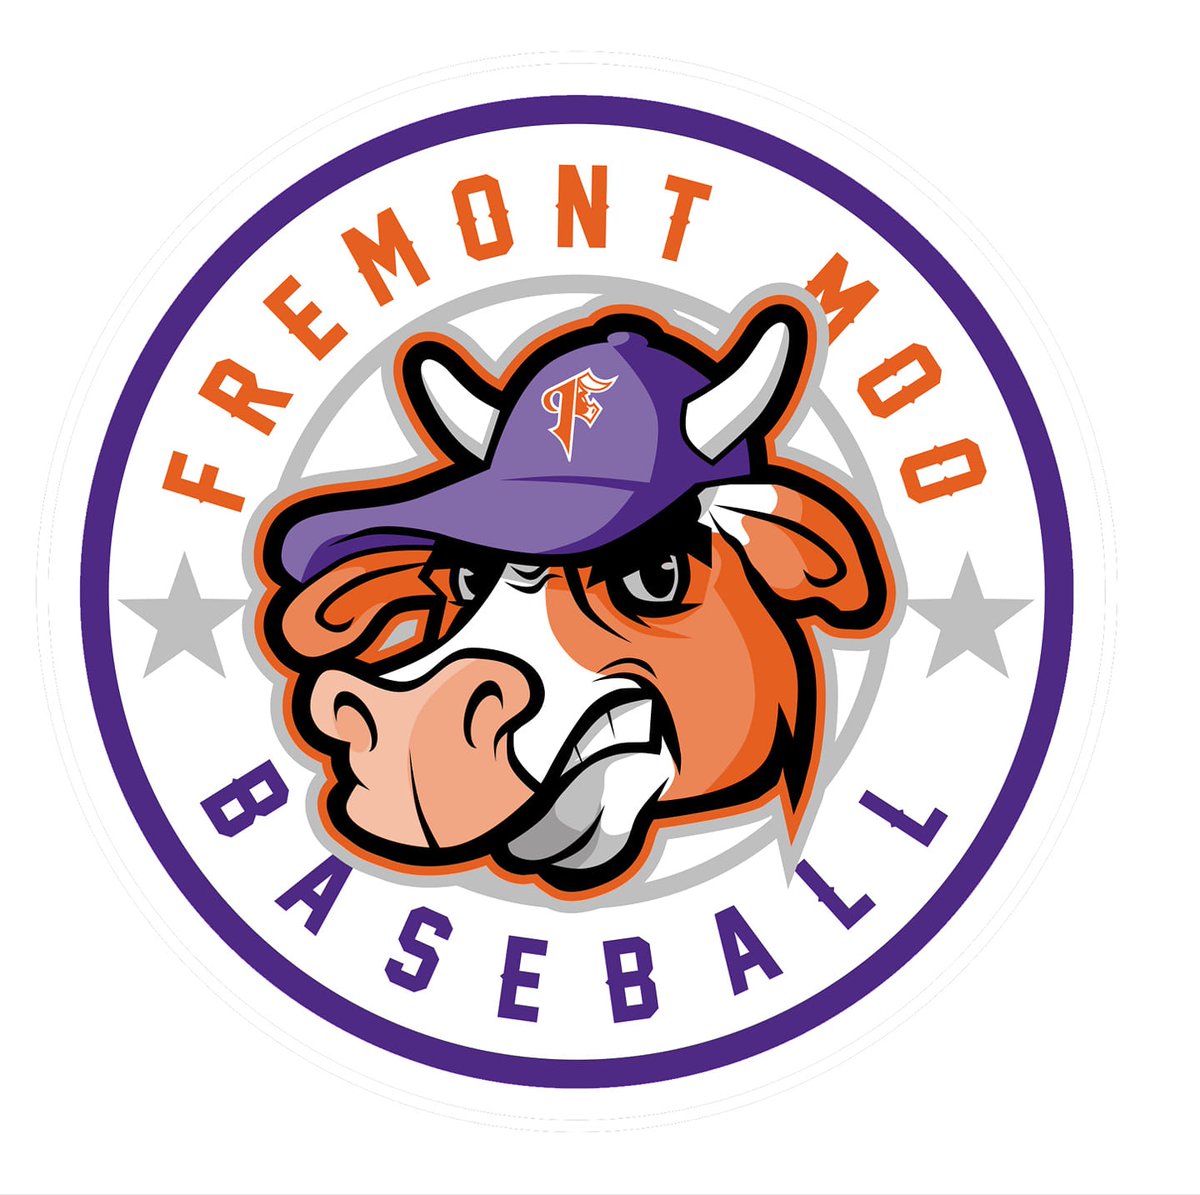 The boys are back in town.

Baseball fans, be sure to swing by your local sports cards and collectibles store before heading down to Moller Field tonight to cheer on the @fremont_moo in their season home opener!